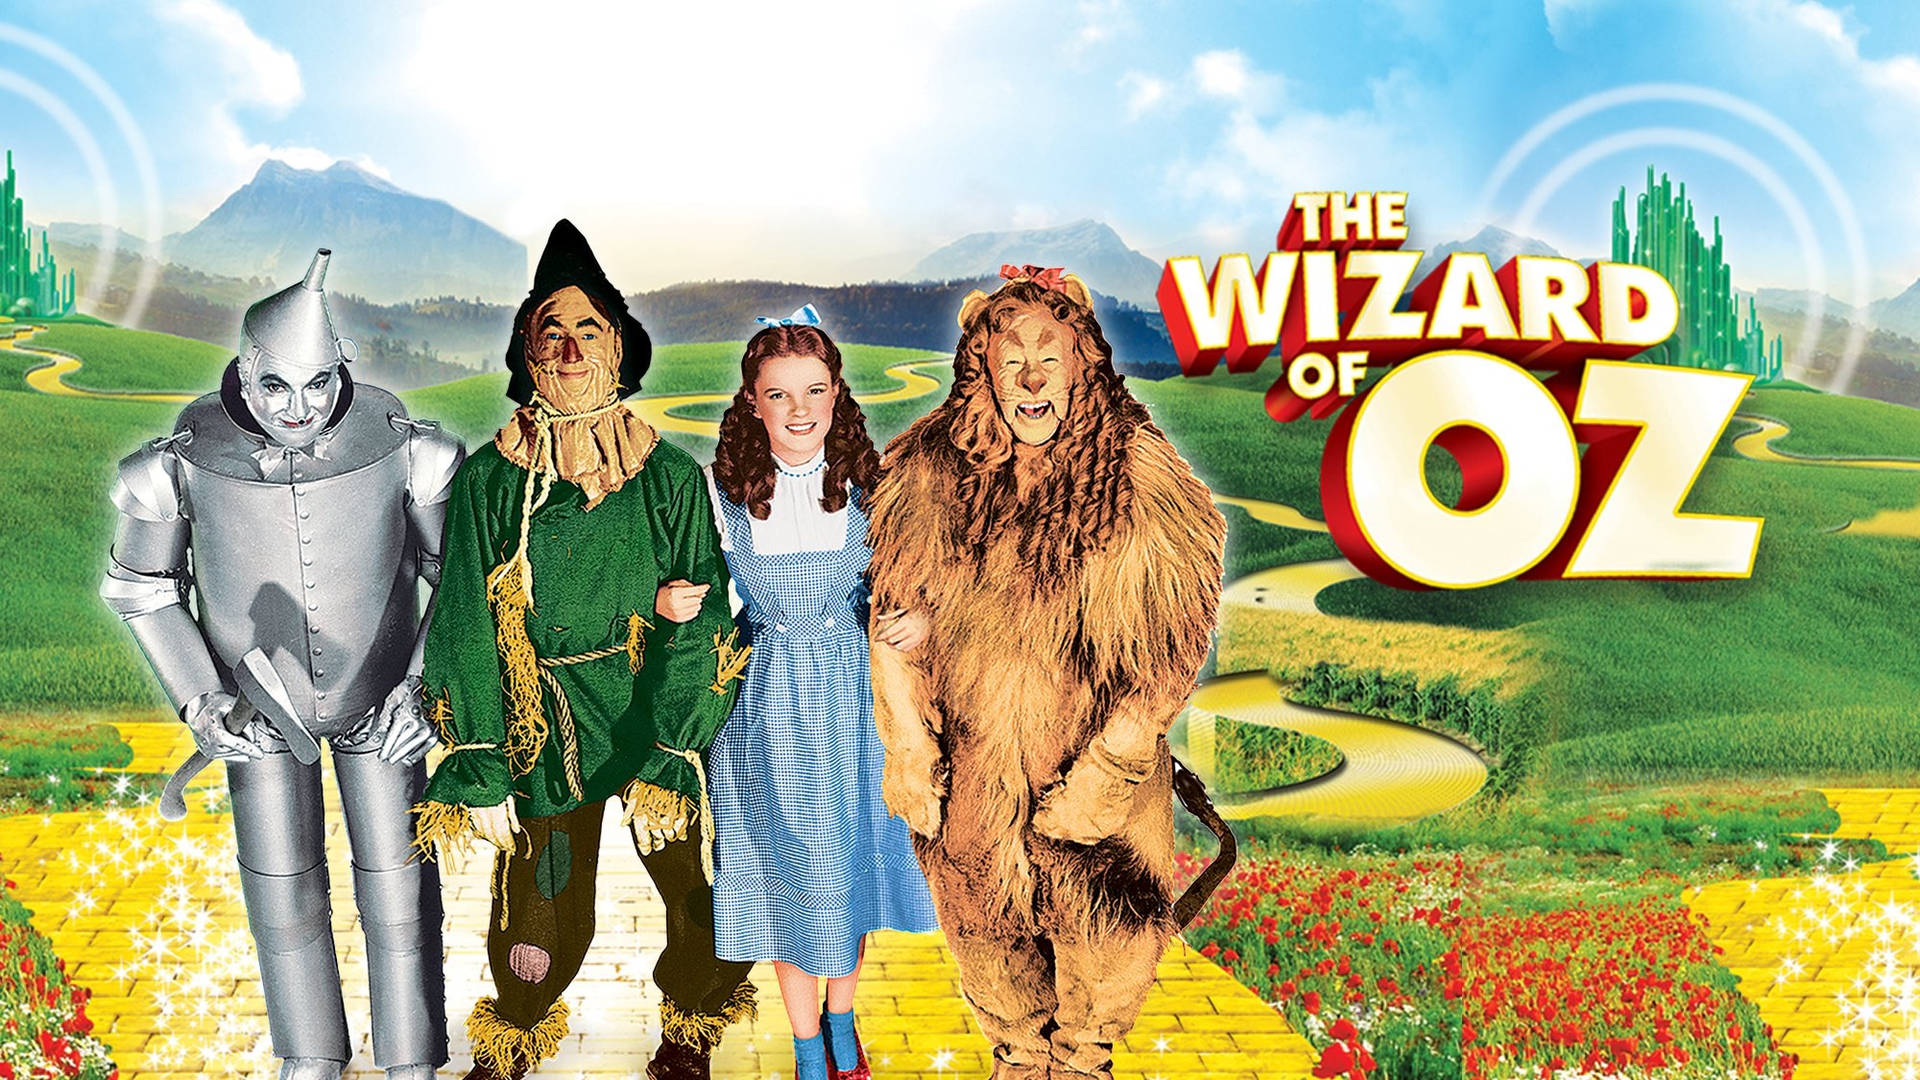 Free The Wizard Of Oz Wallpaper Downloads, The Wizard Of Oz Wallpaper for FREE